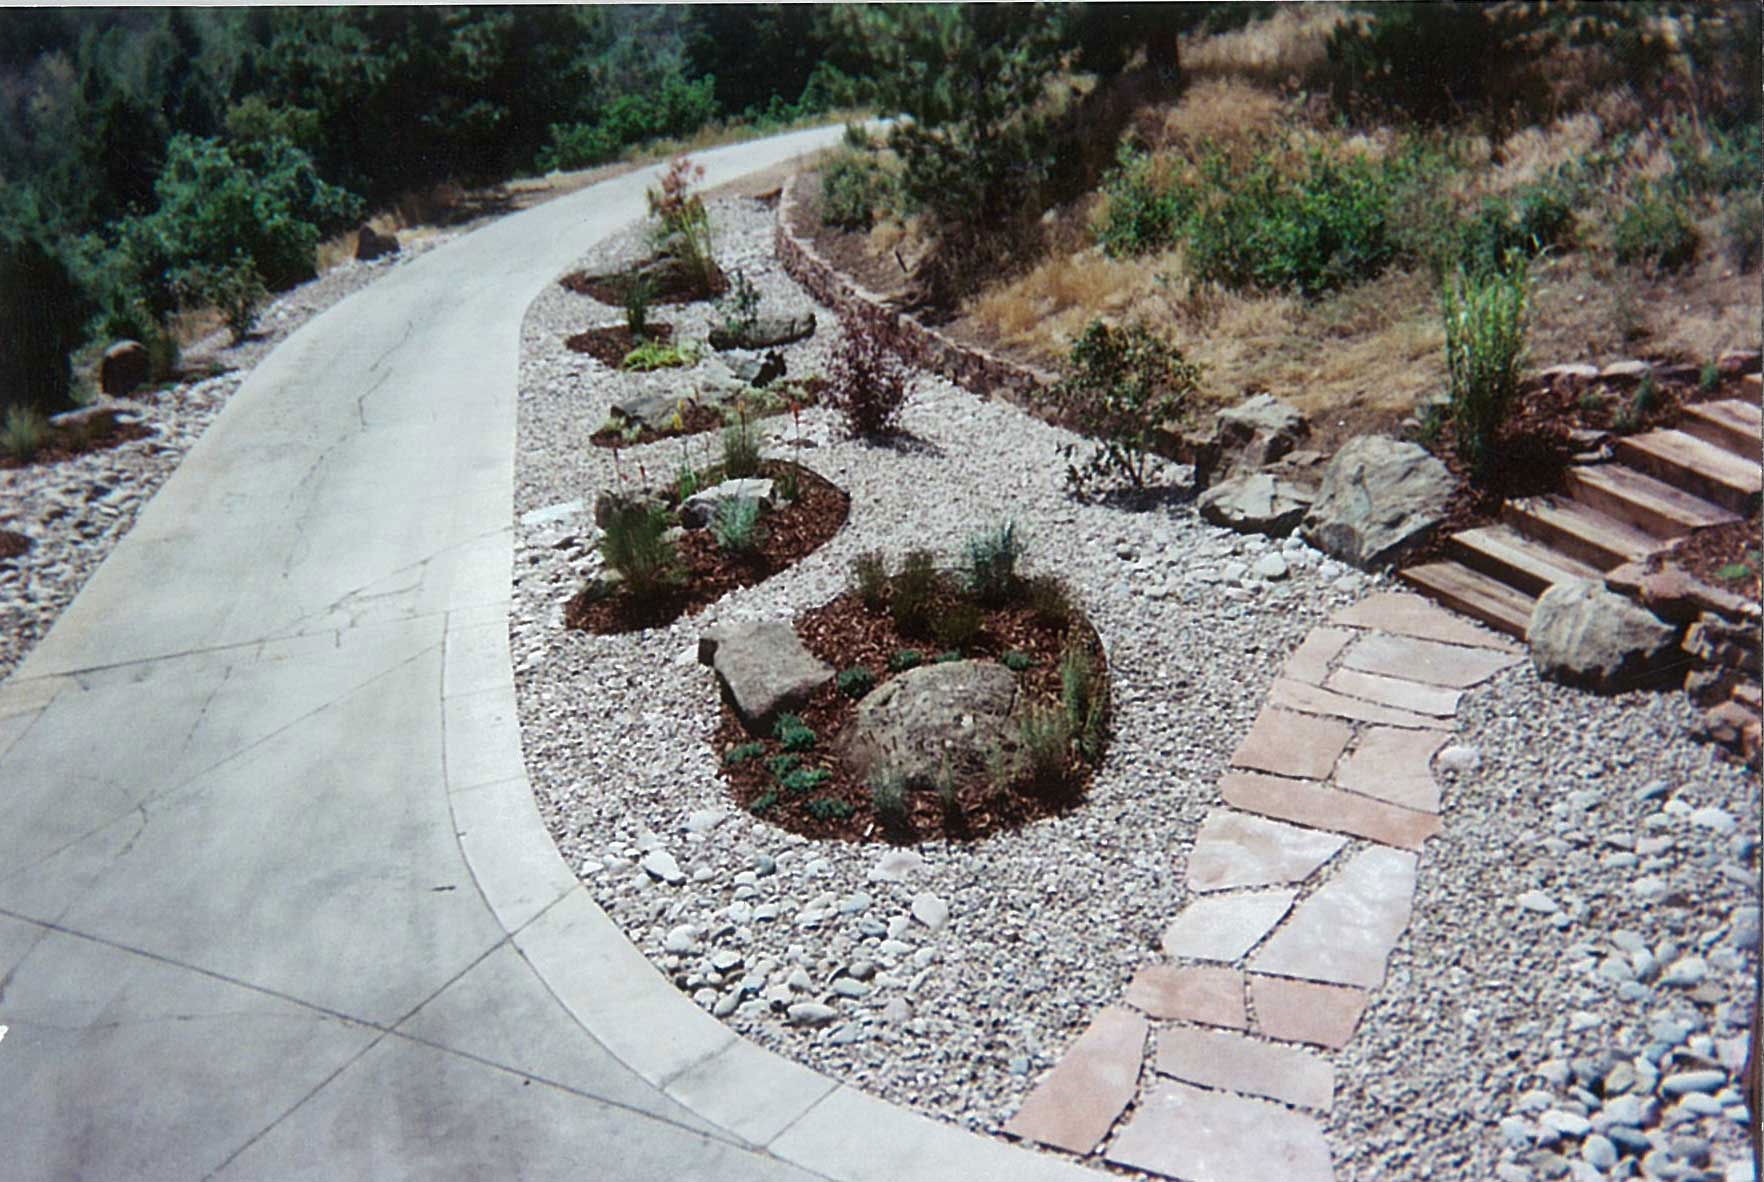 Small pockets of plants within stone landscaping